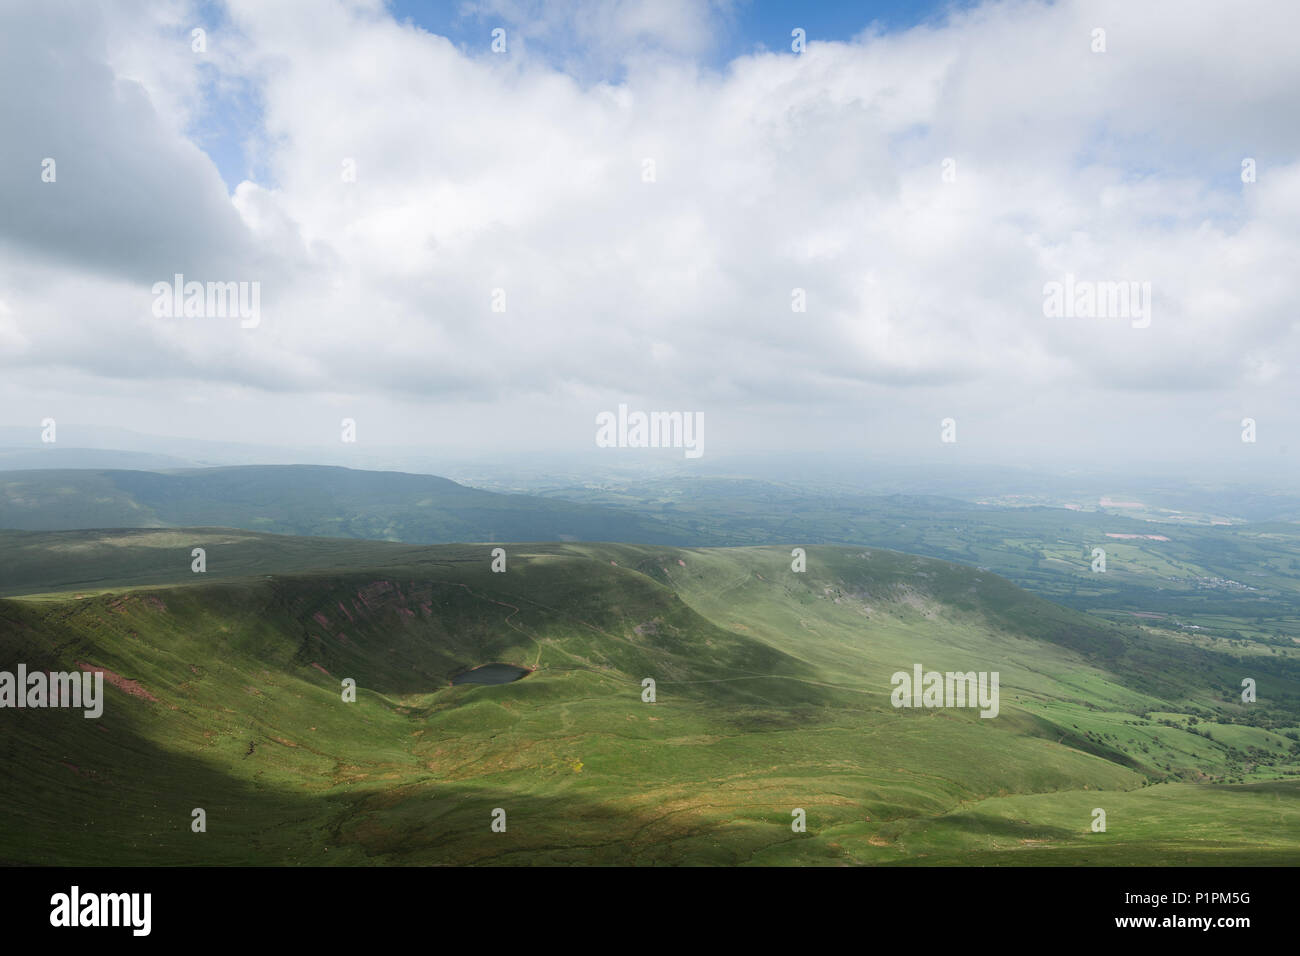 A view from the top of Pen Y Fan - the tallest mountain in the southern UK (south of Snowdonia). Wales, UK Stock Photo